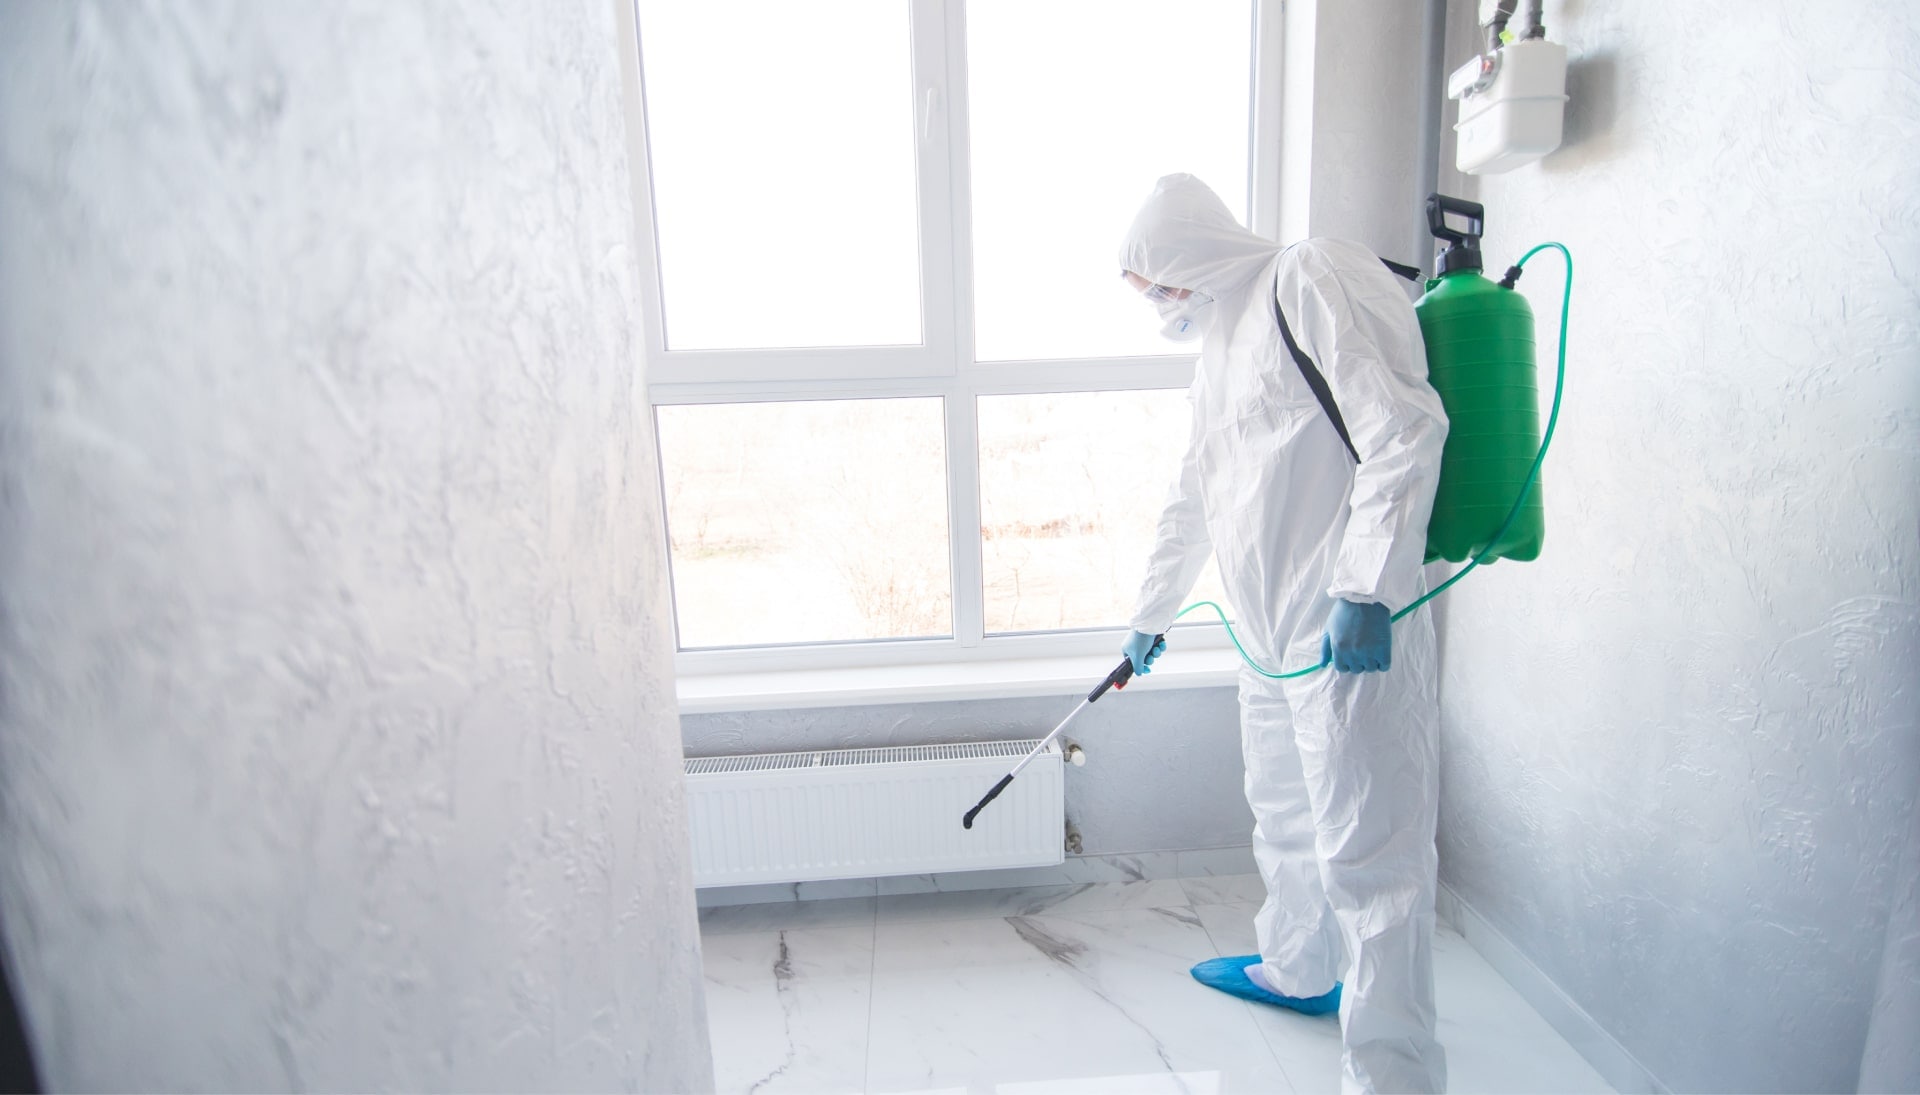 We provide the highest-quality mold inspection, testing, and removal services in the Marco Island, Florida area.